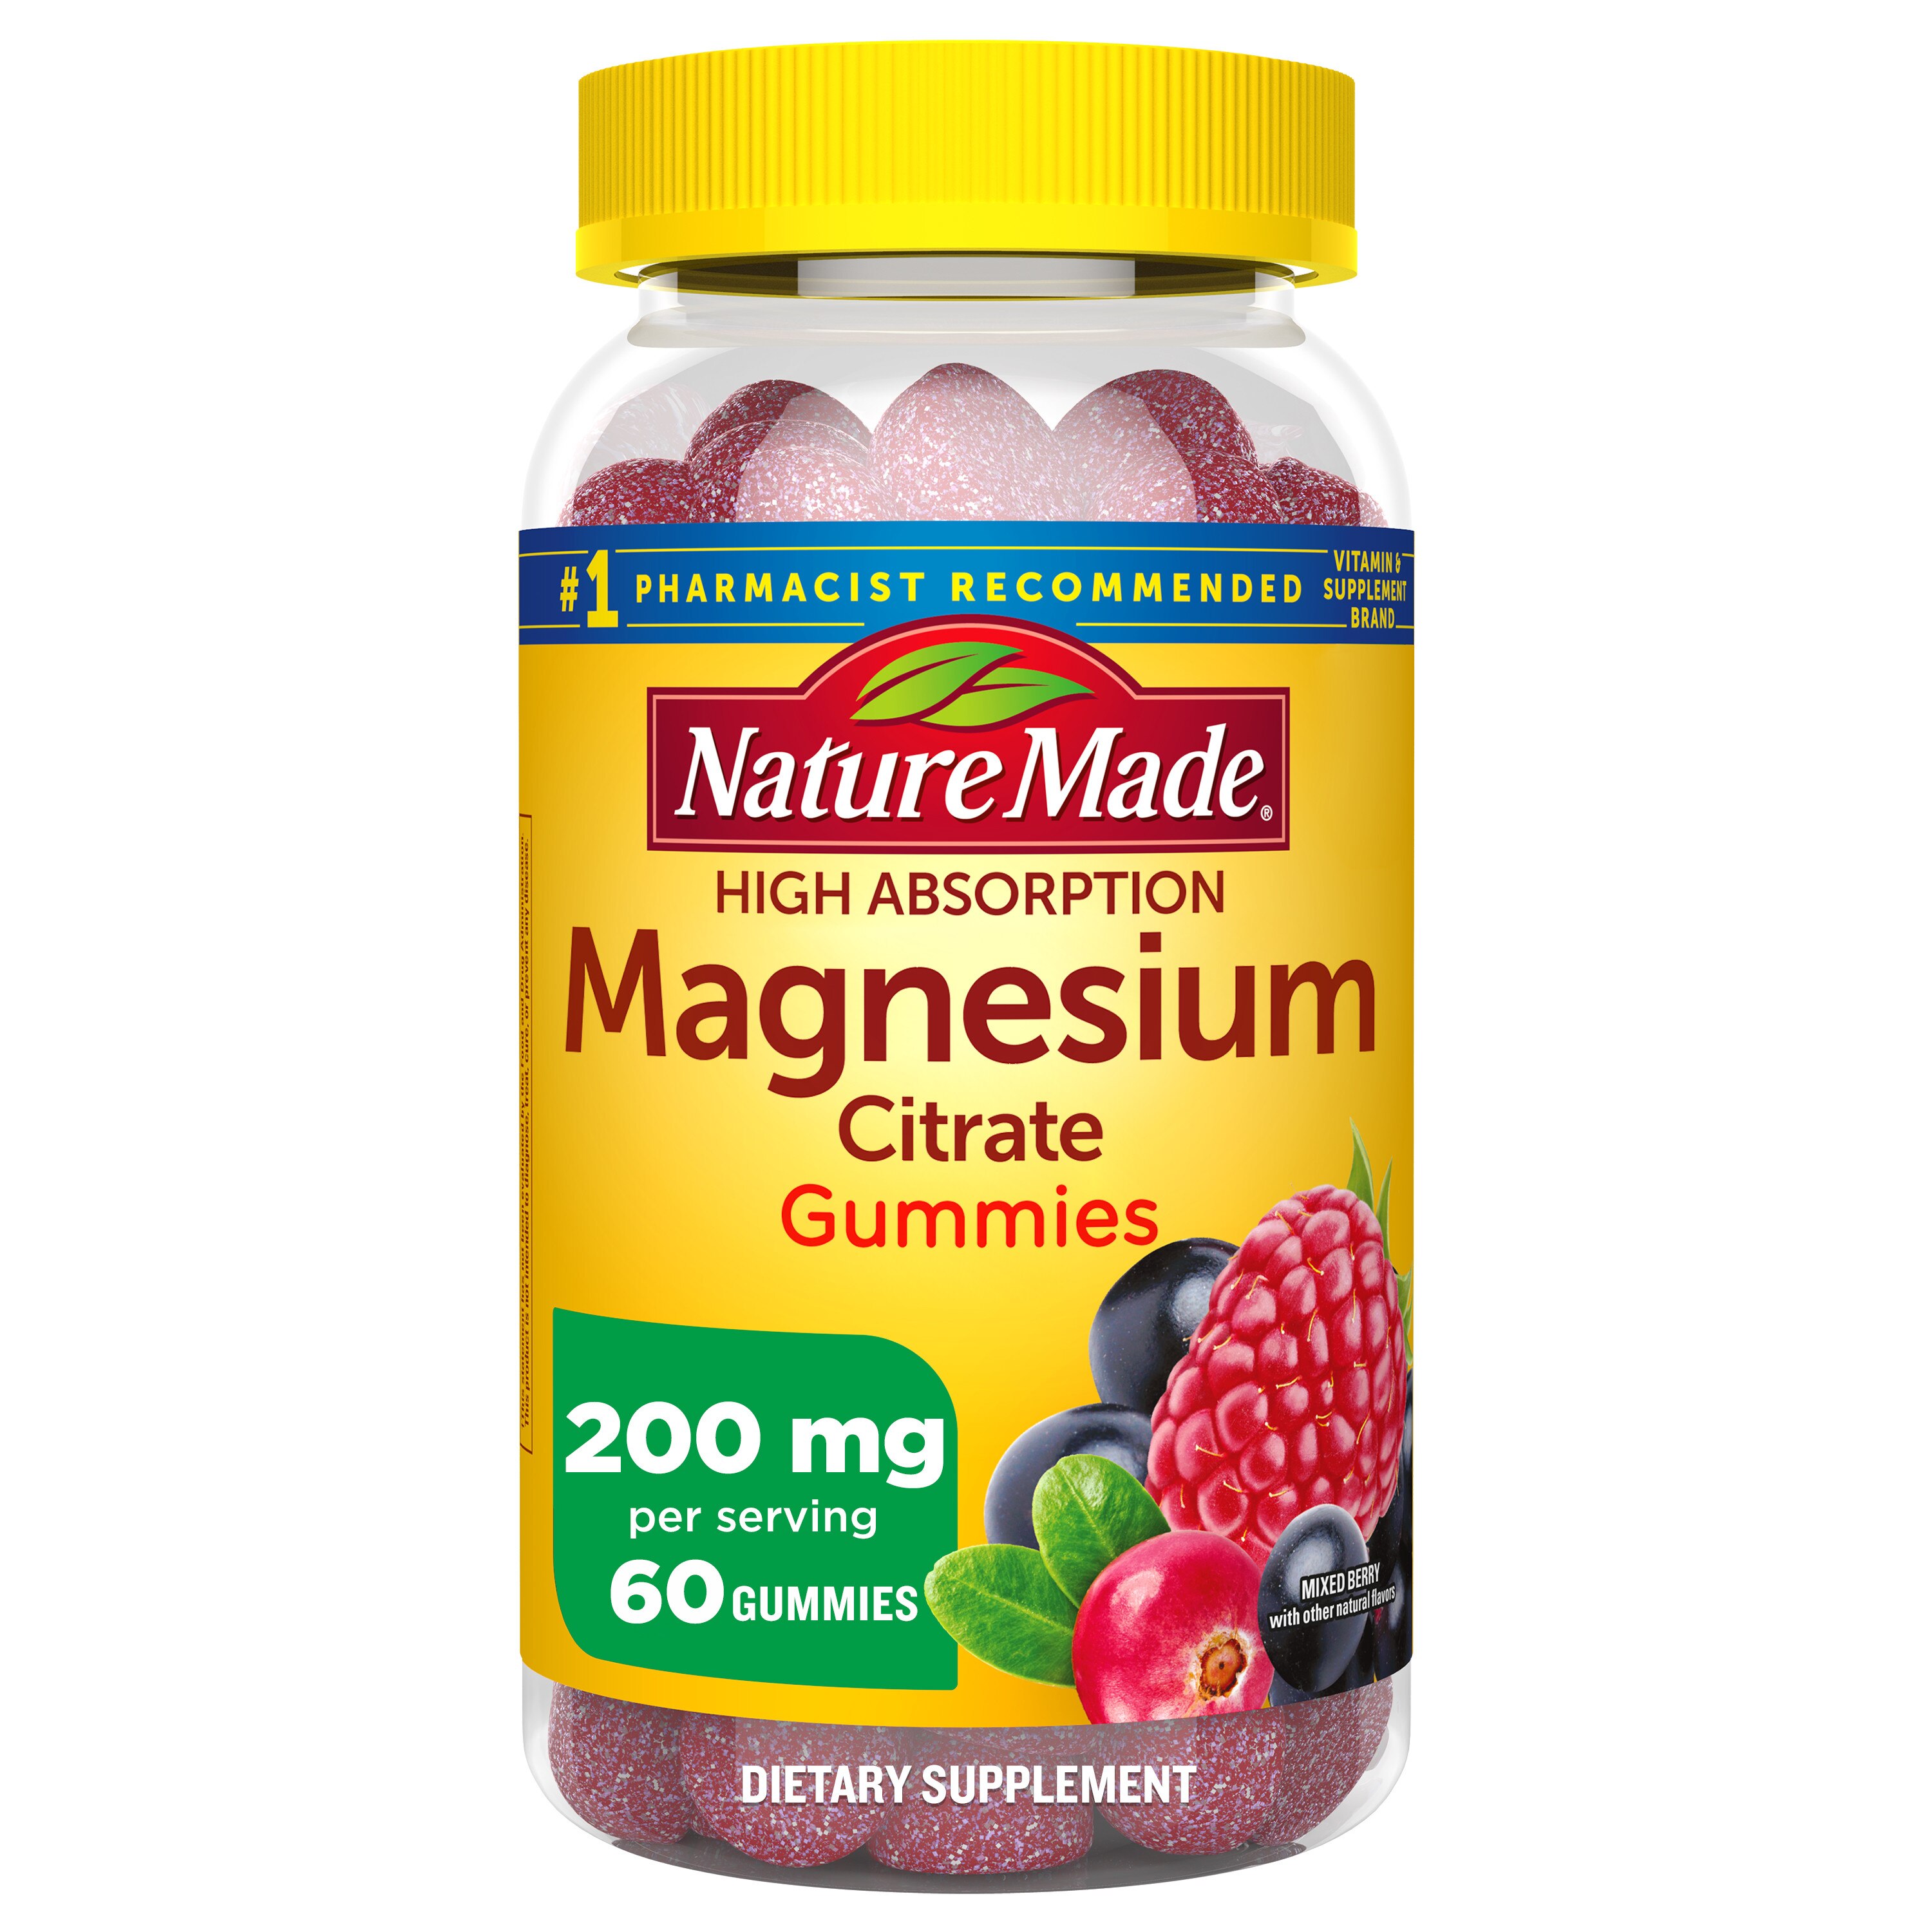 Nature Made High Absorption Magnesium Citrate 200mg Gummies, 60 CT